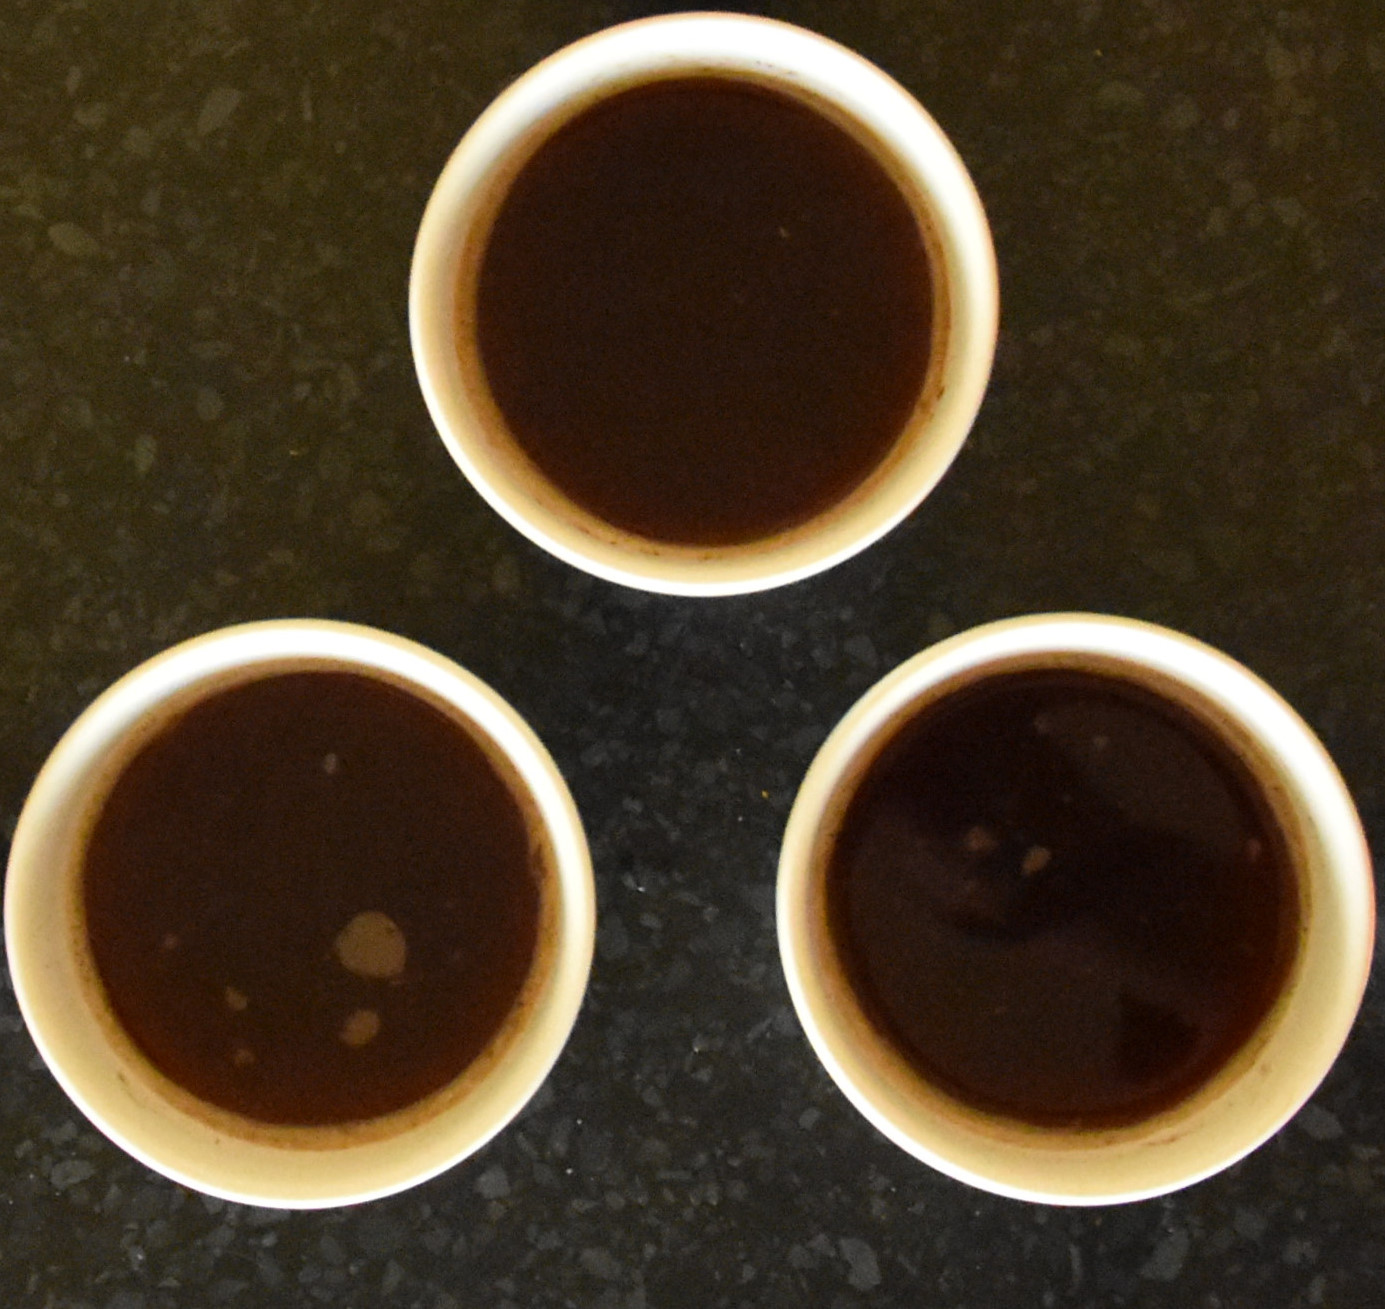 Three bowls of coffee, seen from above, two roasted by Quarter Horse and one by Hundred House. But which is the odd one out?